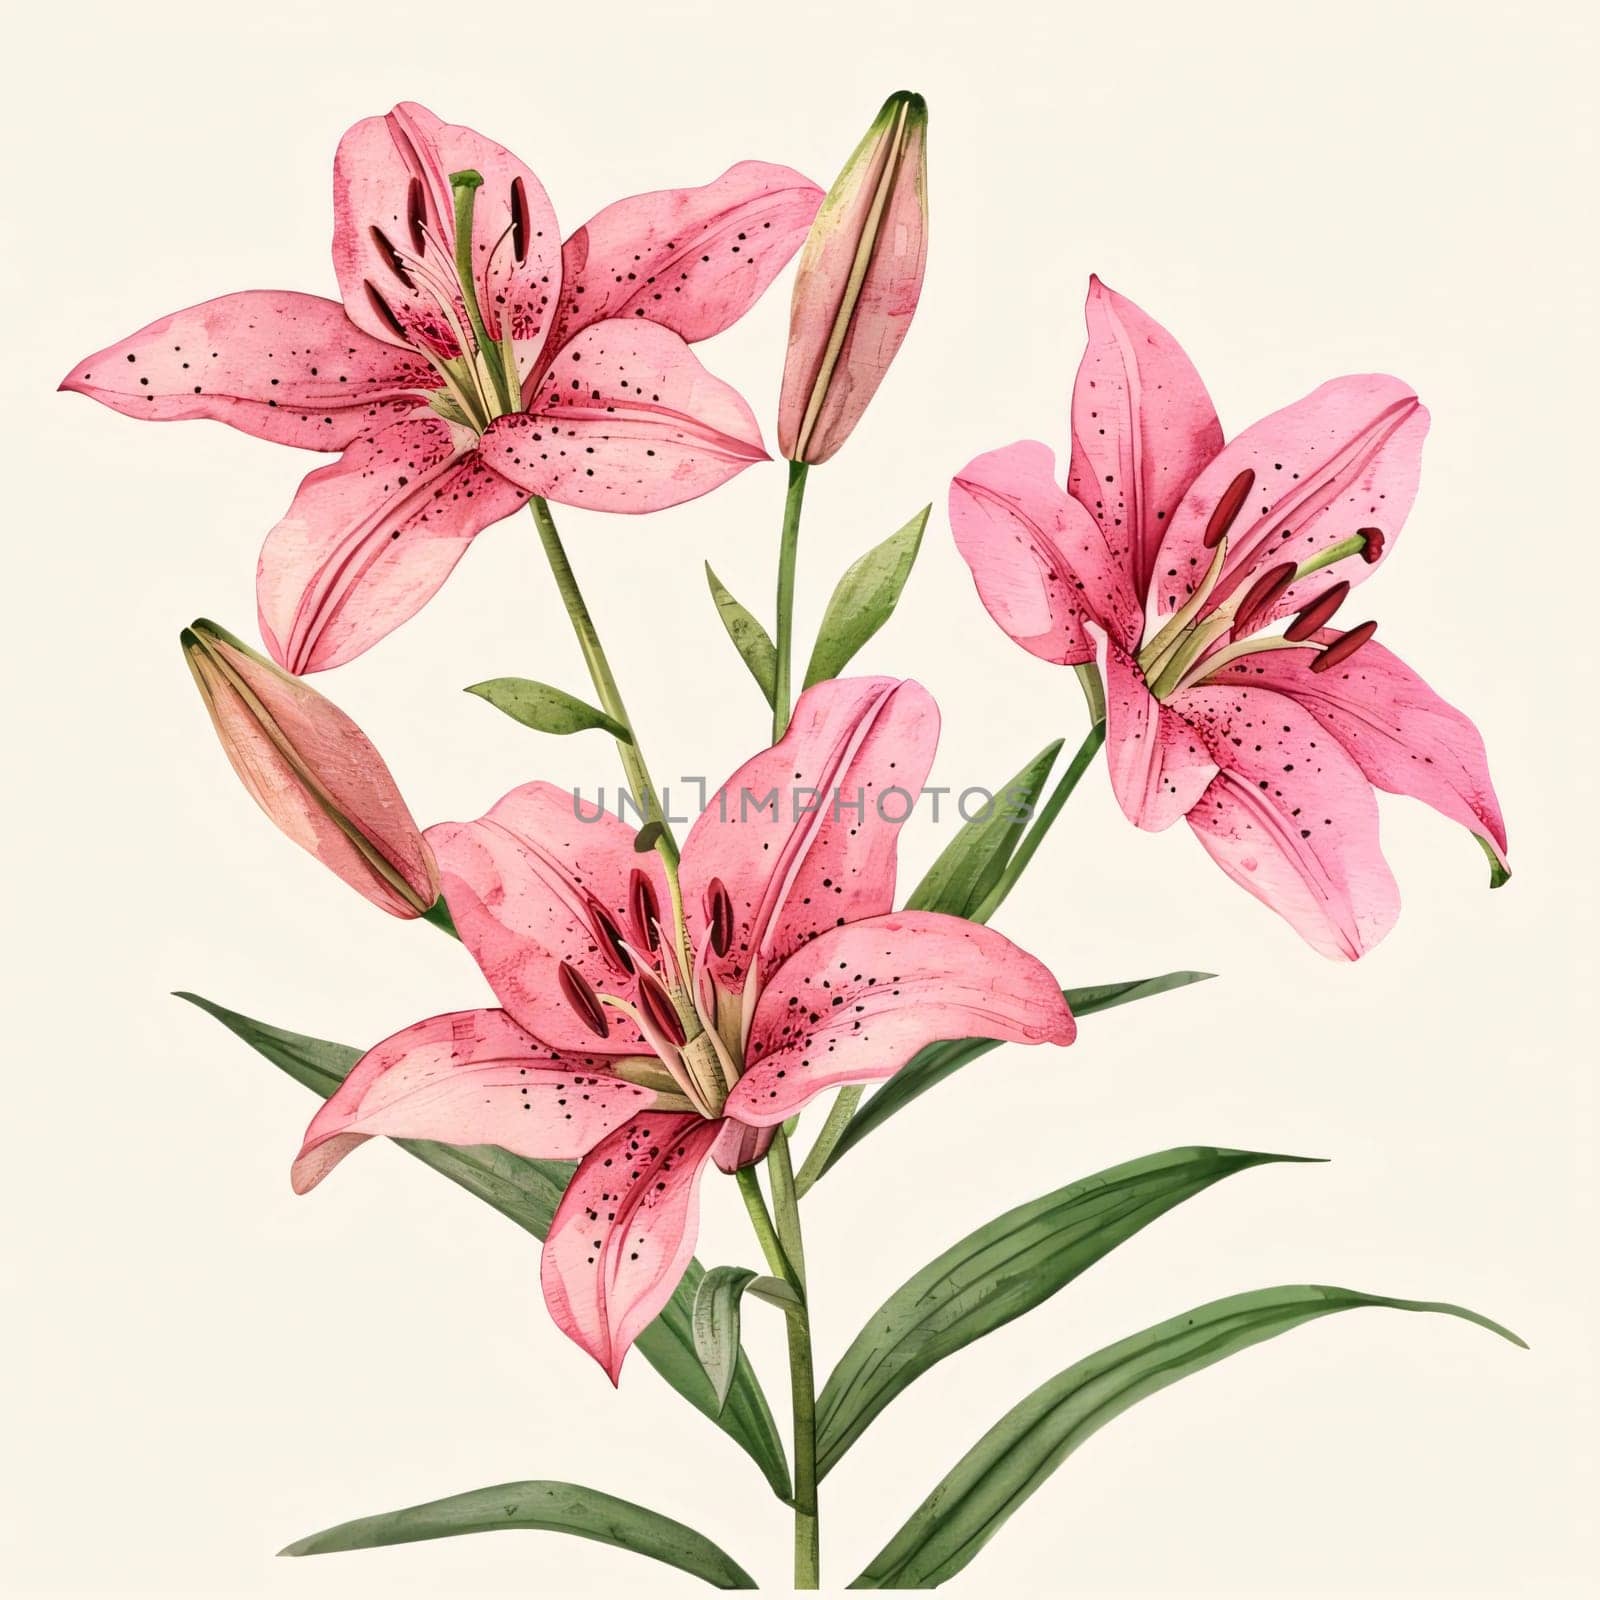 Drawn, painted flowers: pink lily flowers with green stem and leaves. Flowering flowers, a symbol of spring, new life. by ThemesS